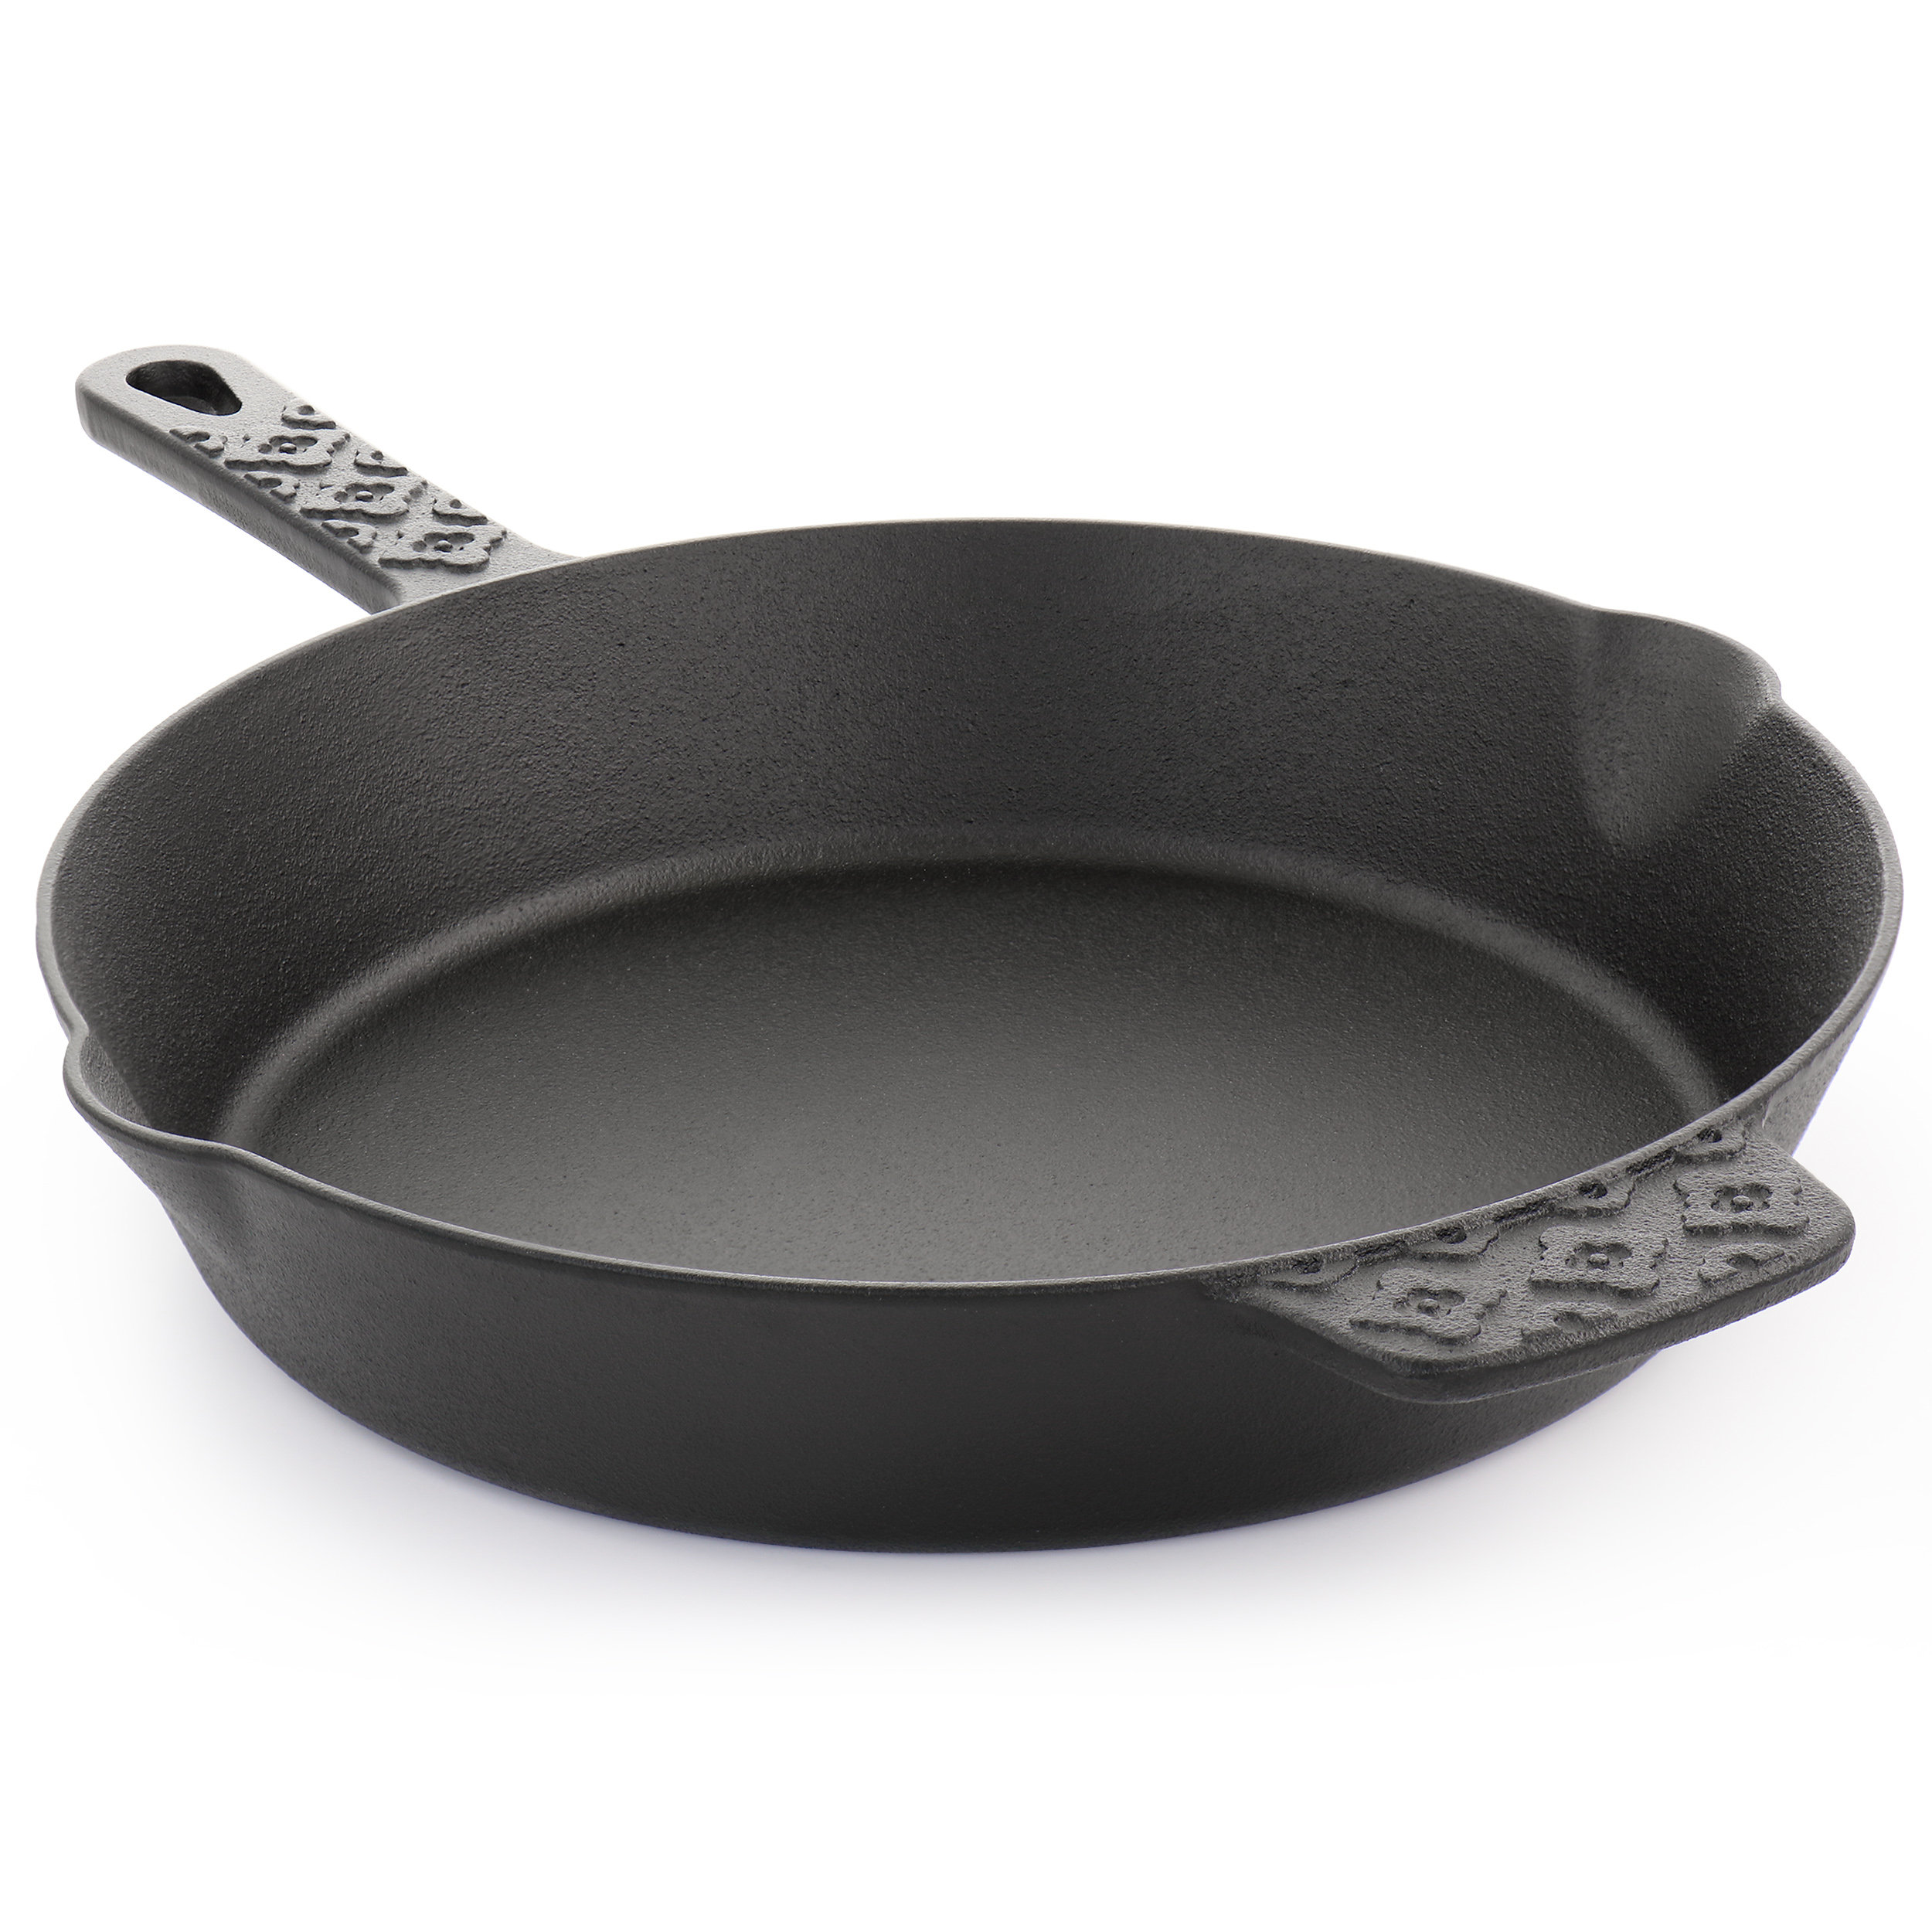 Spice By Tia Mowry Skillet, Cast Iron, 12 Inches